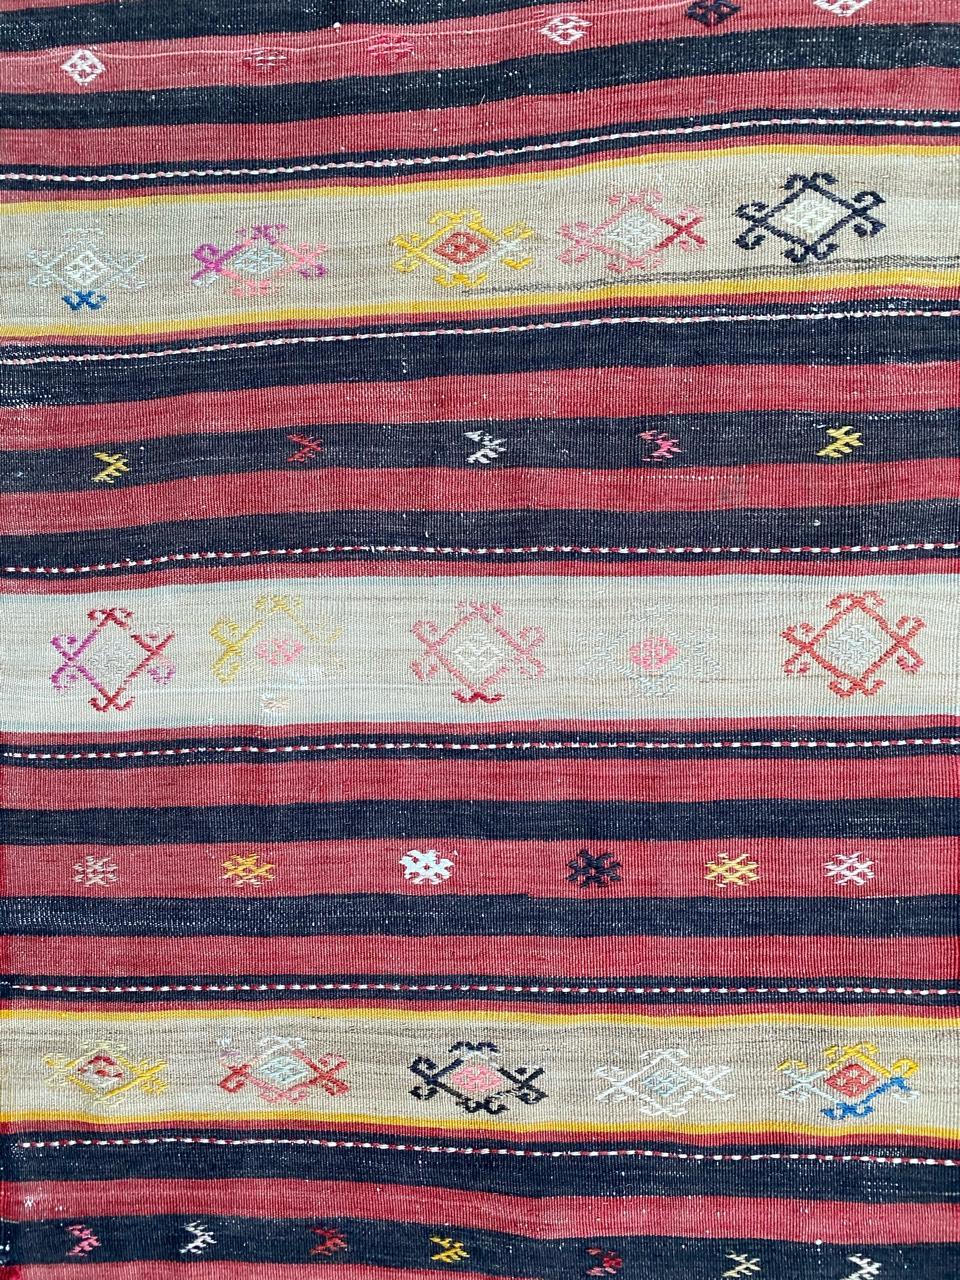 Beautiful Kilim with a tribal design and beautiful colors with red, brown, blue, orange and pink, entirely handwoven with wool on cotton.